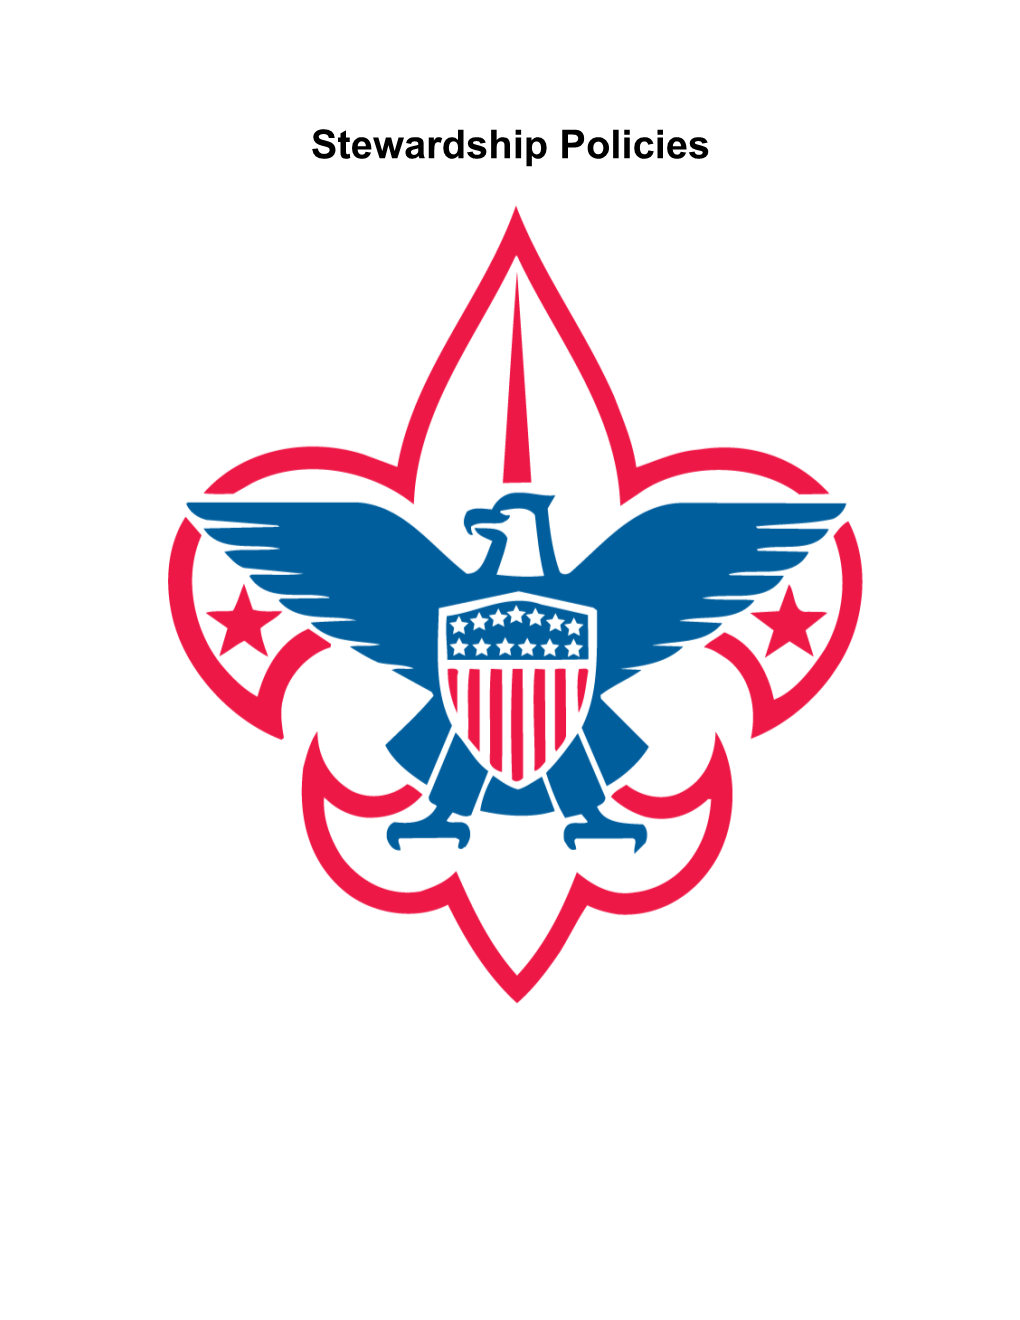 (Council Name Here) Council Policy Boy Scouts of America s1